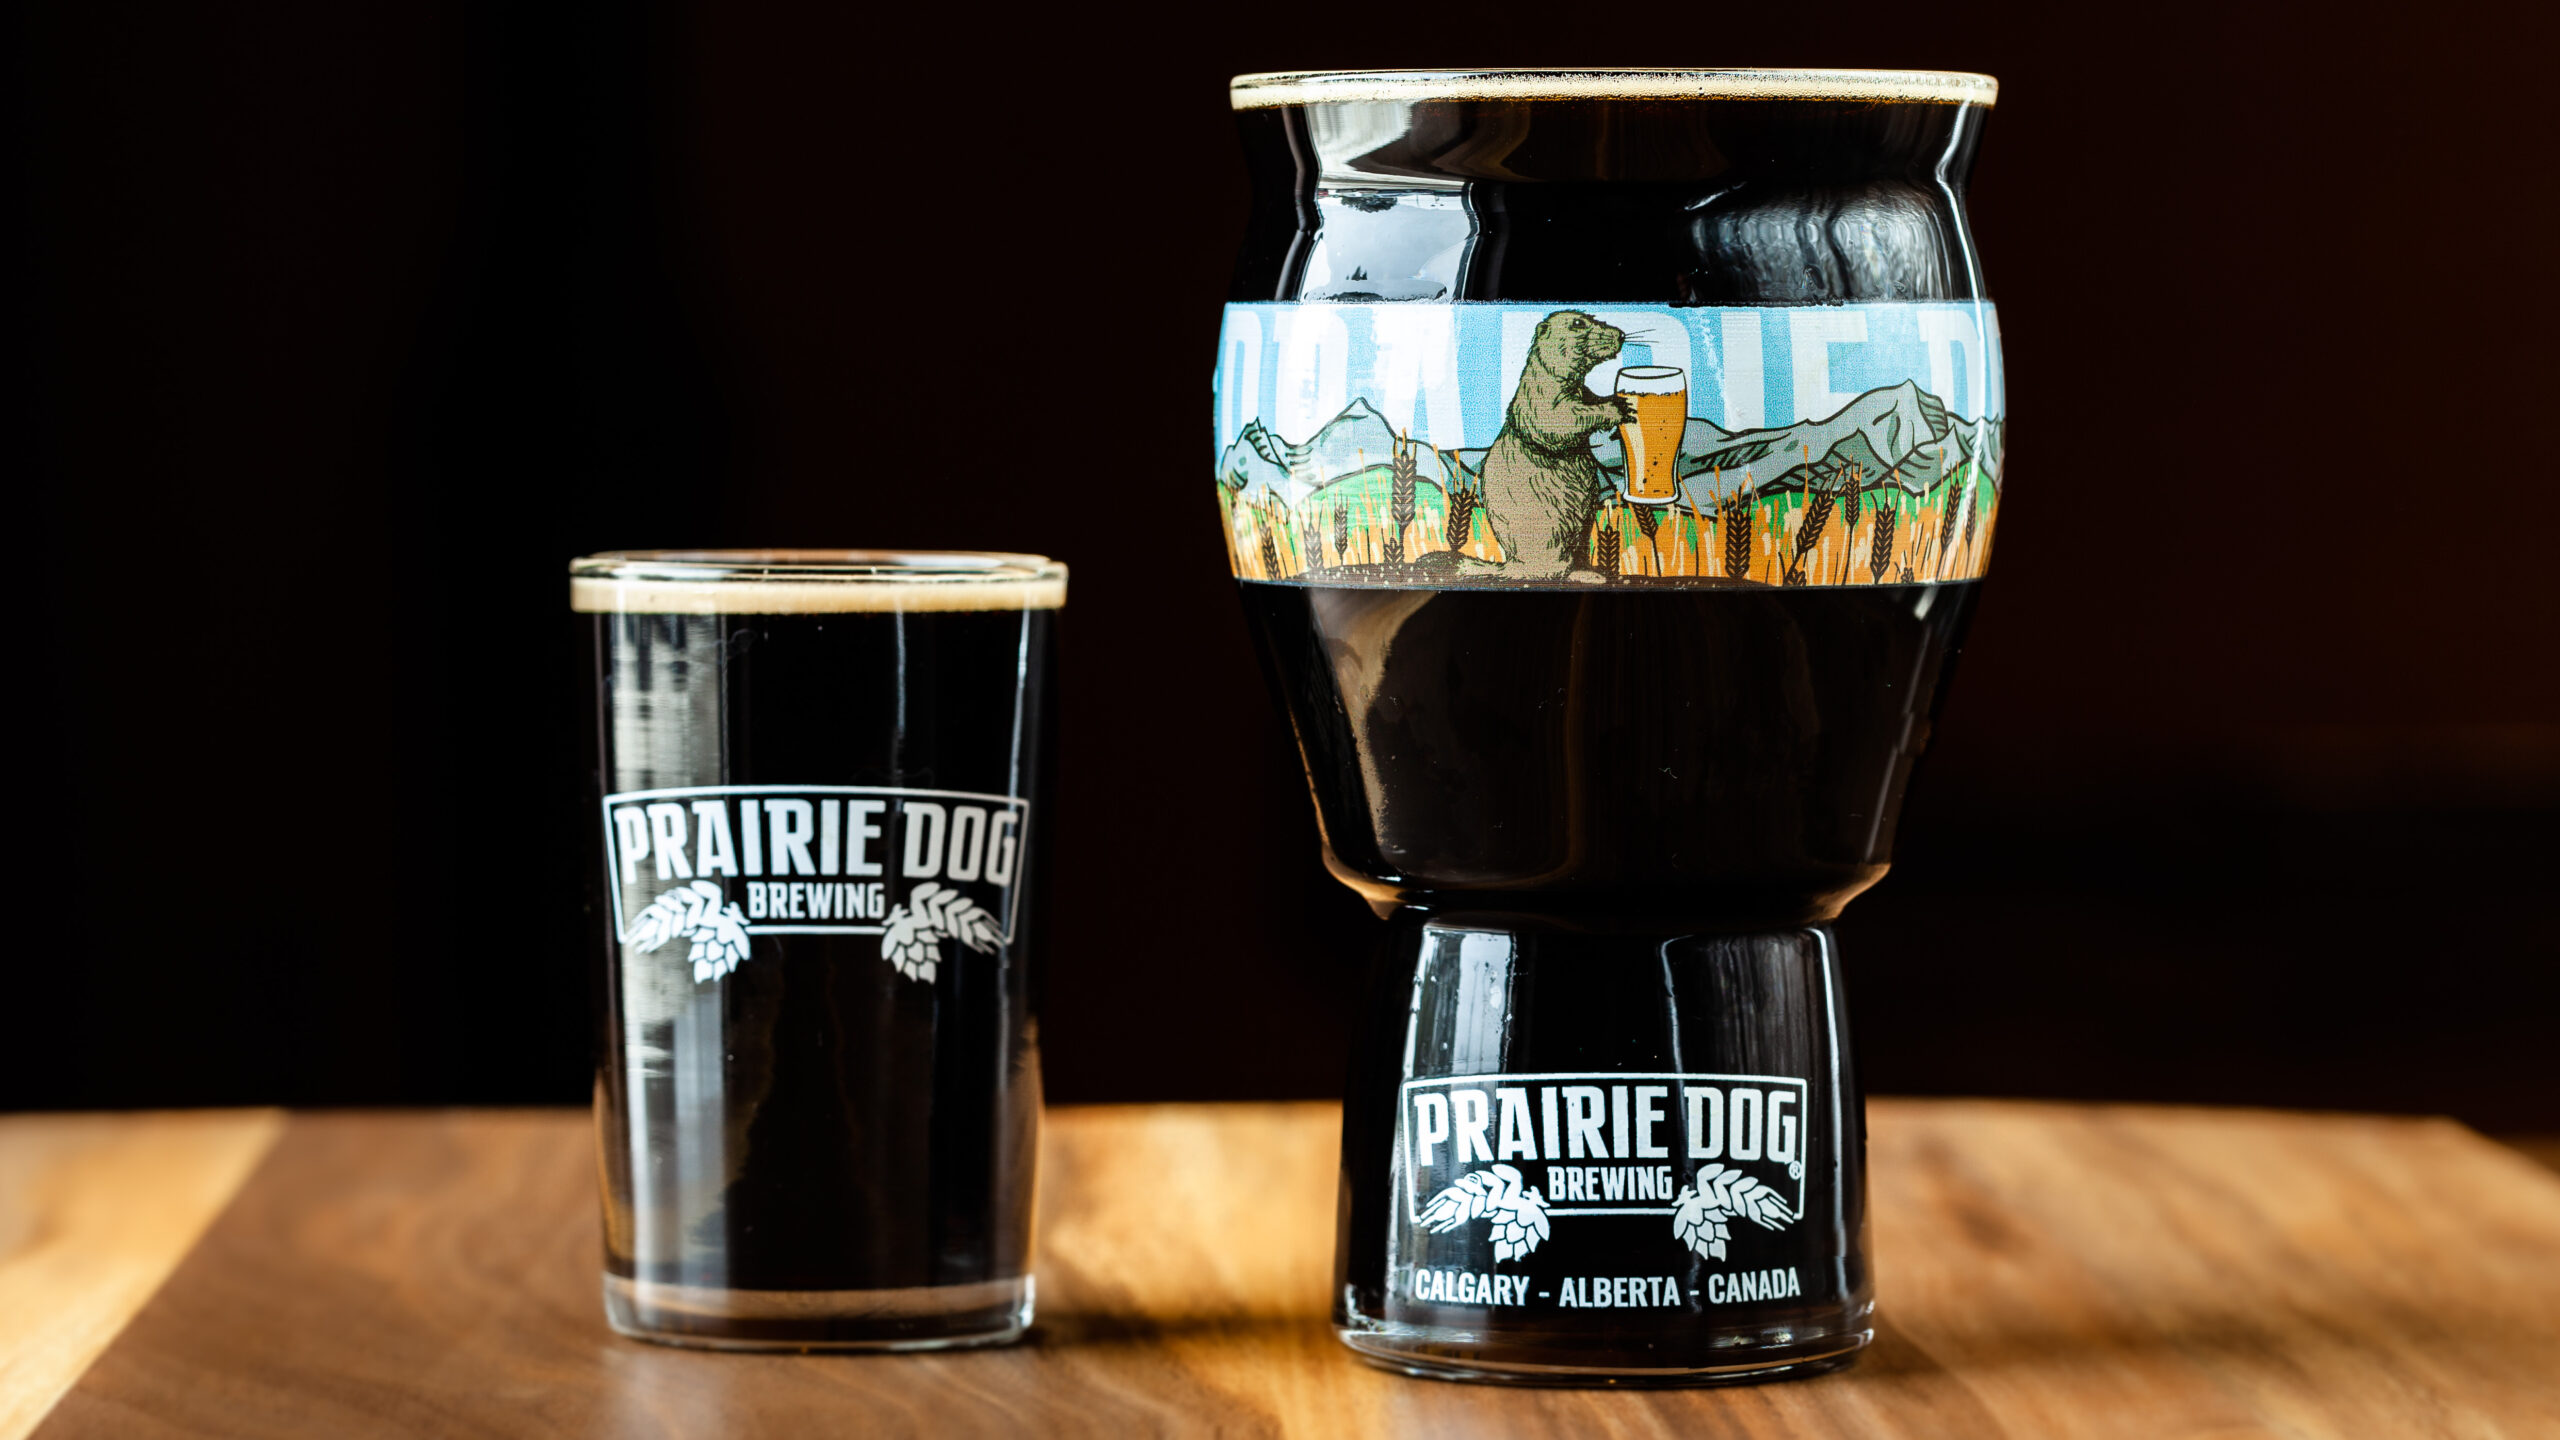 Prairie Dog Brewing Wholly Mole Mexican-inspired chocolate chili pepper stout in three draft options - 5oz or 16oz pours.